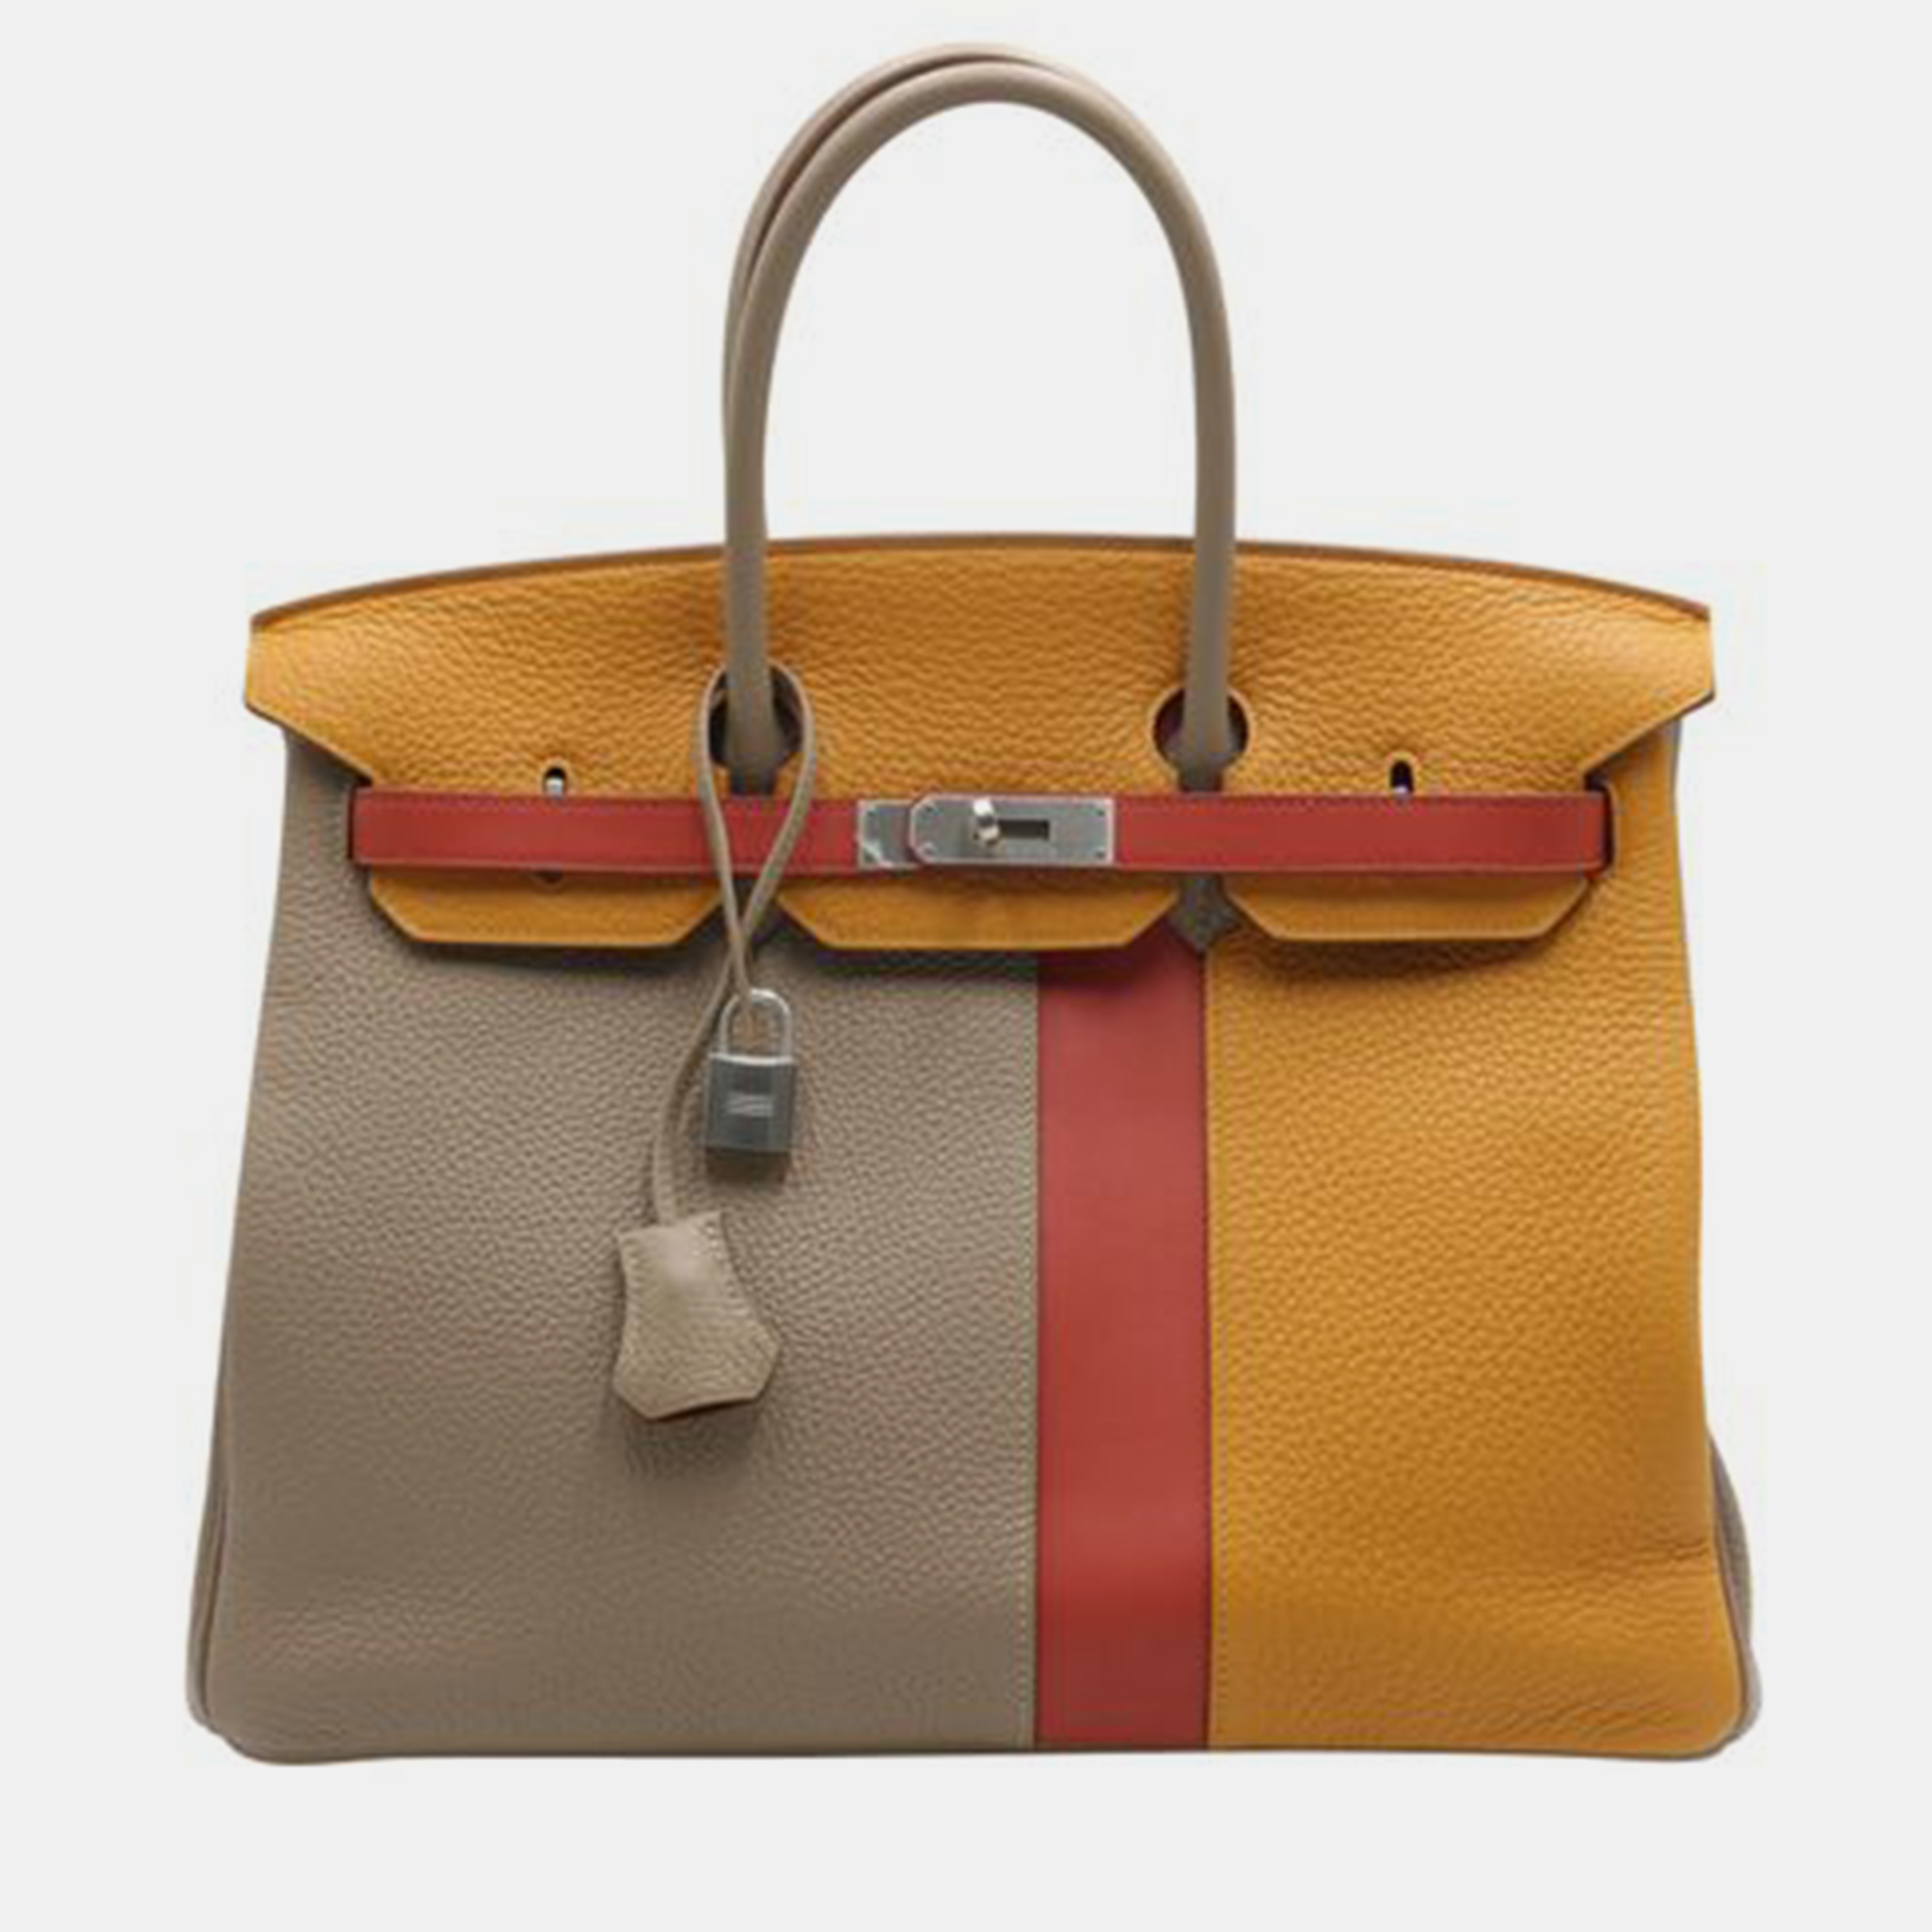 HERMES Limited Edition Tri-Color Birkin 35 Gris Tourterelle/Moutarde Clemence And Sanguine Swift Leather Palladium Plated HANDBAGS